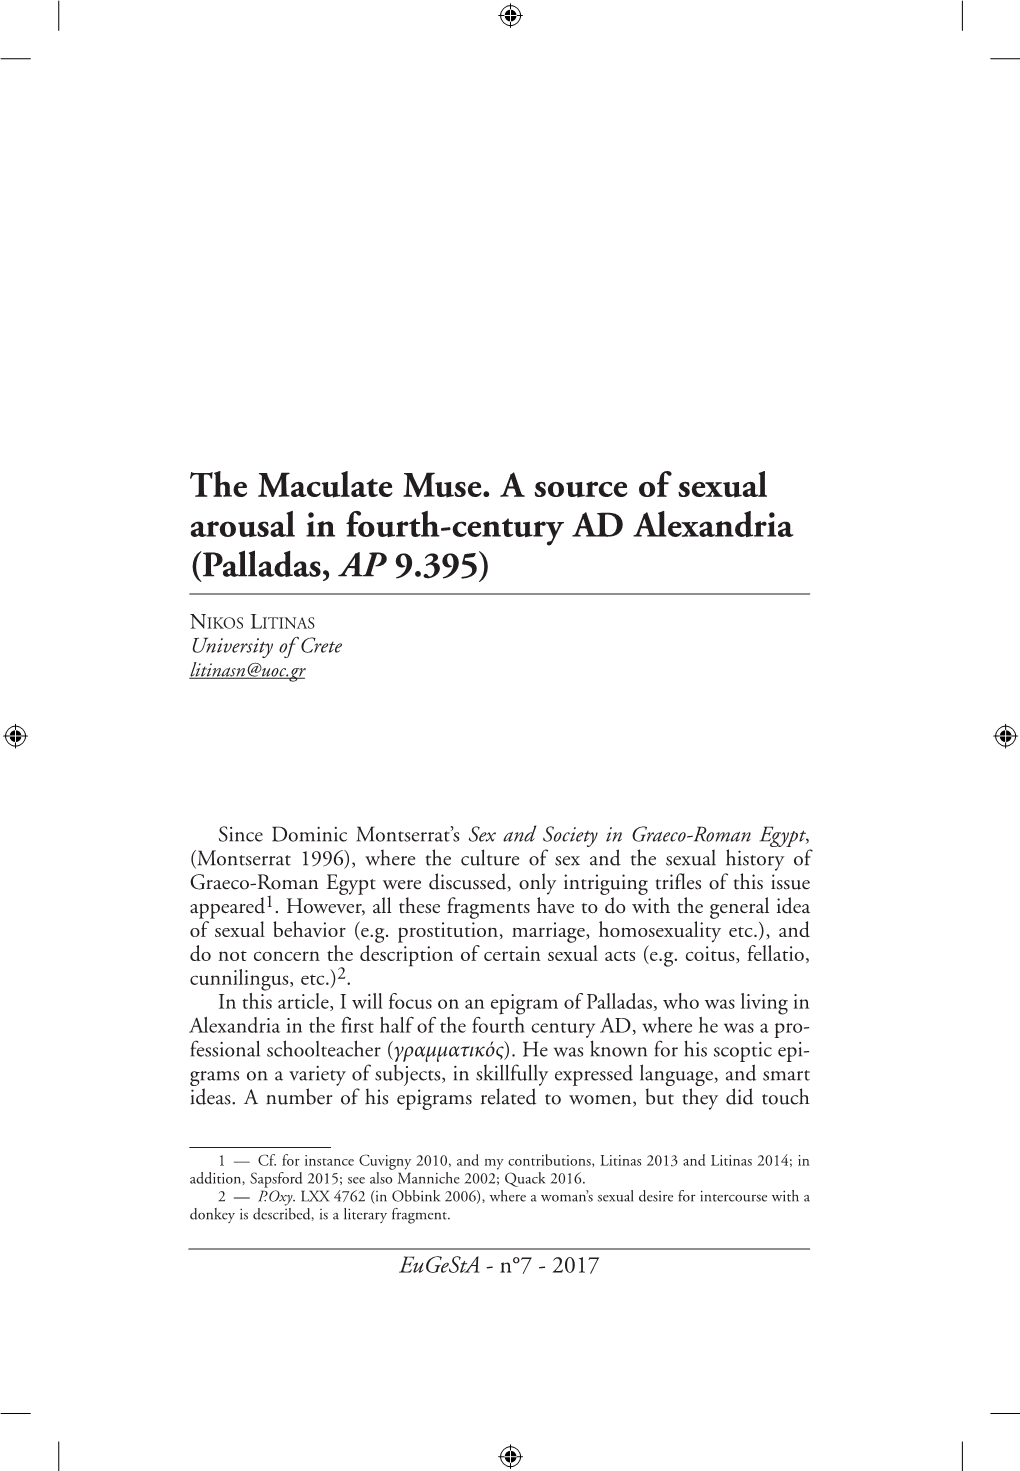 The Maculate Muse. a Source of Sexual Arousal in Fourth-Century AD Alexandria (Palladas, AP 9.395)